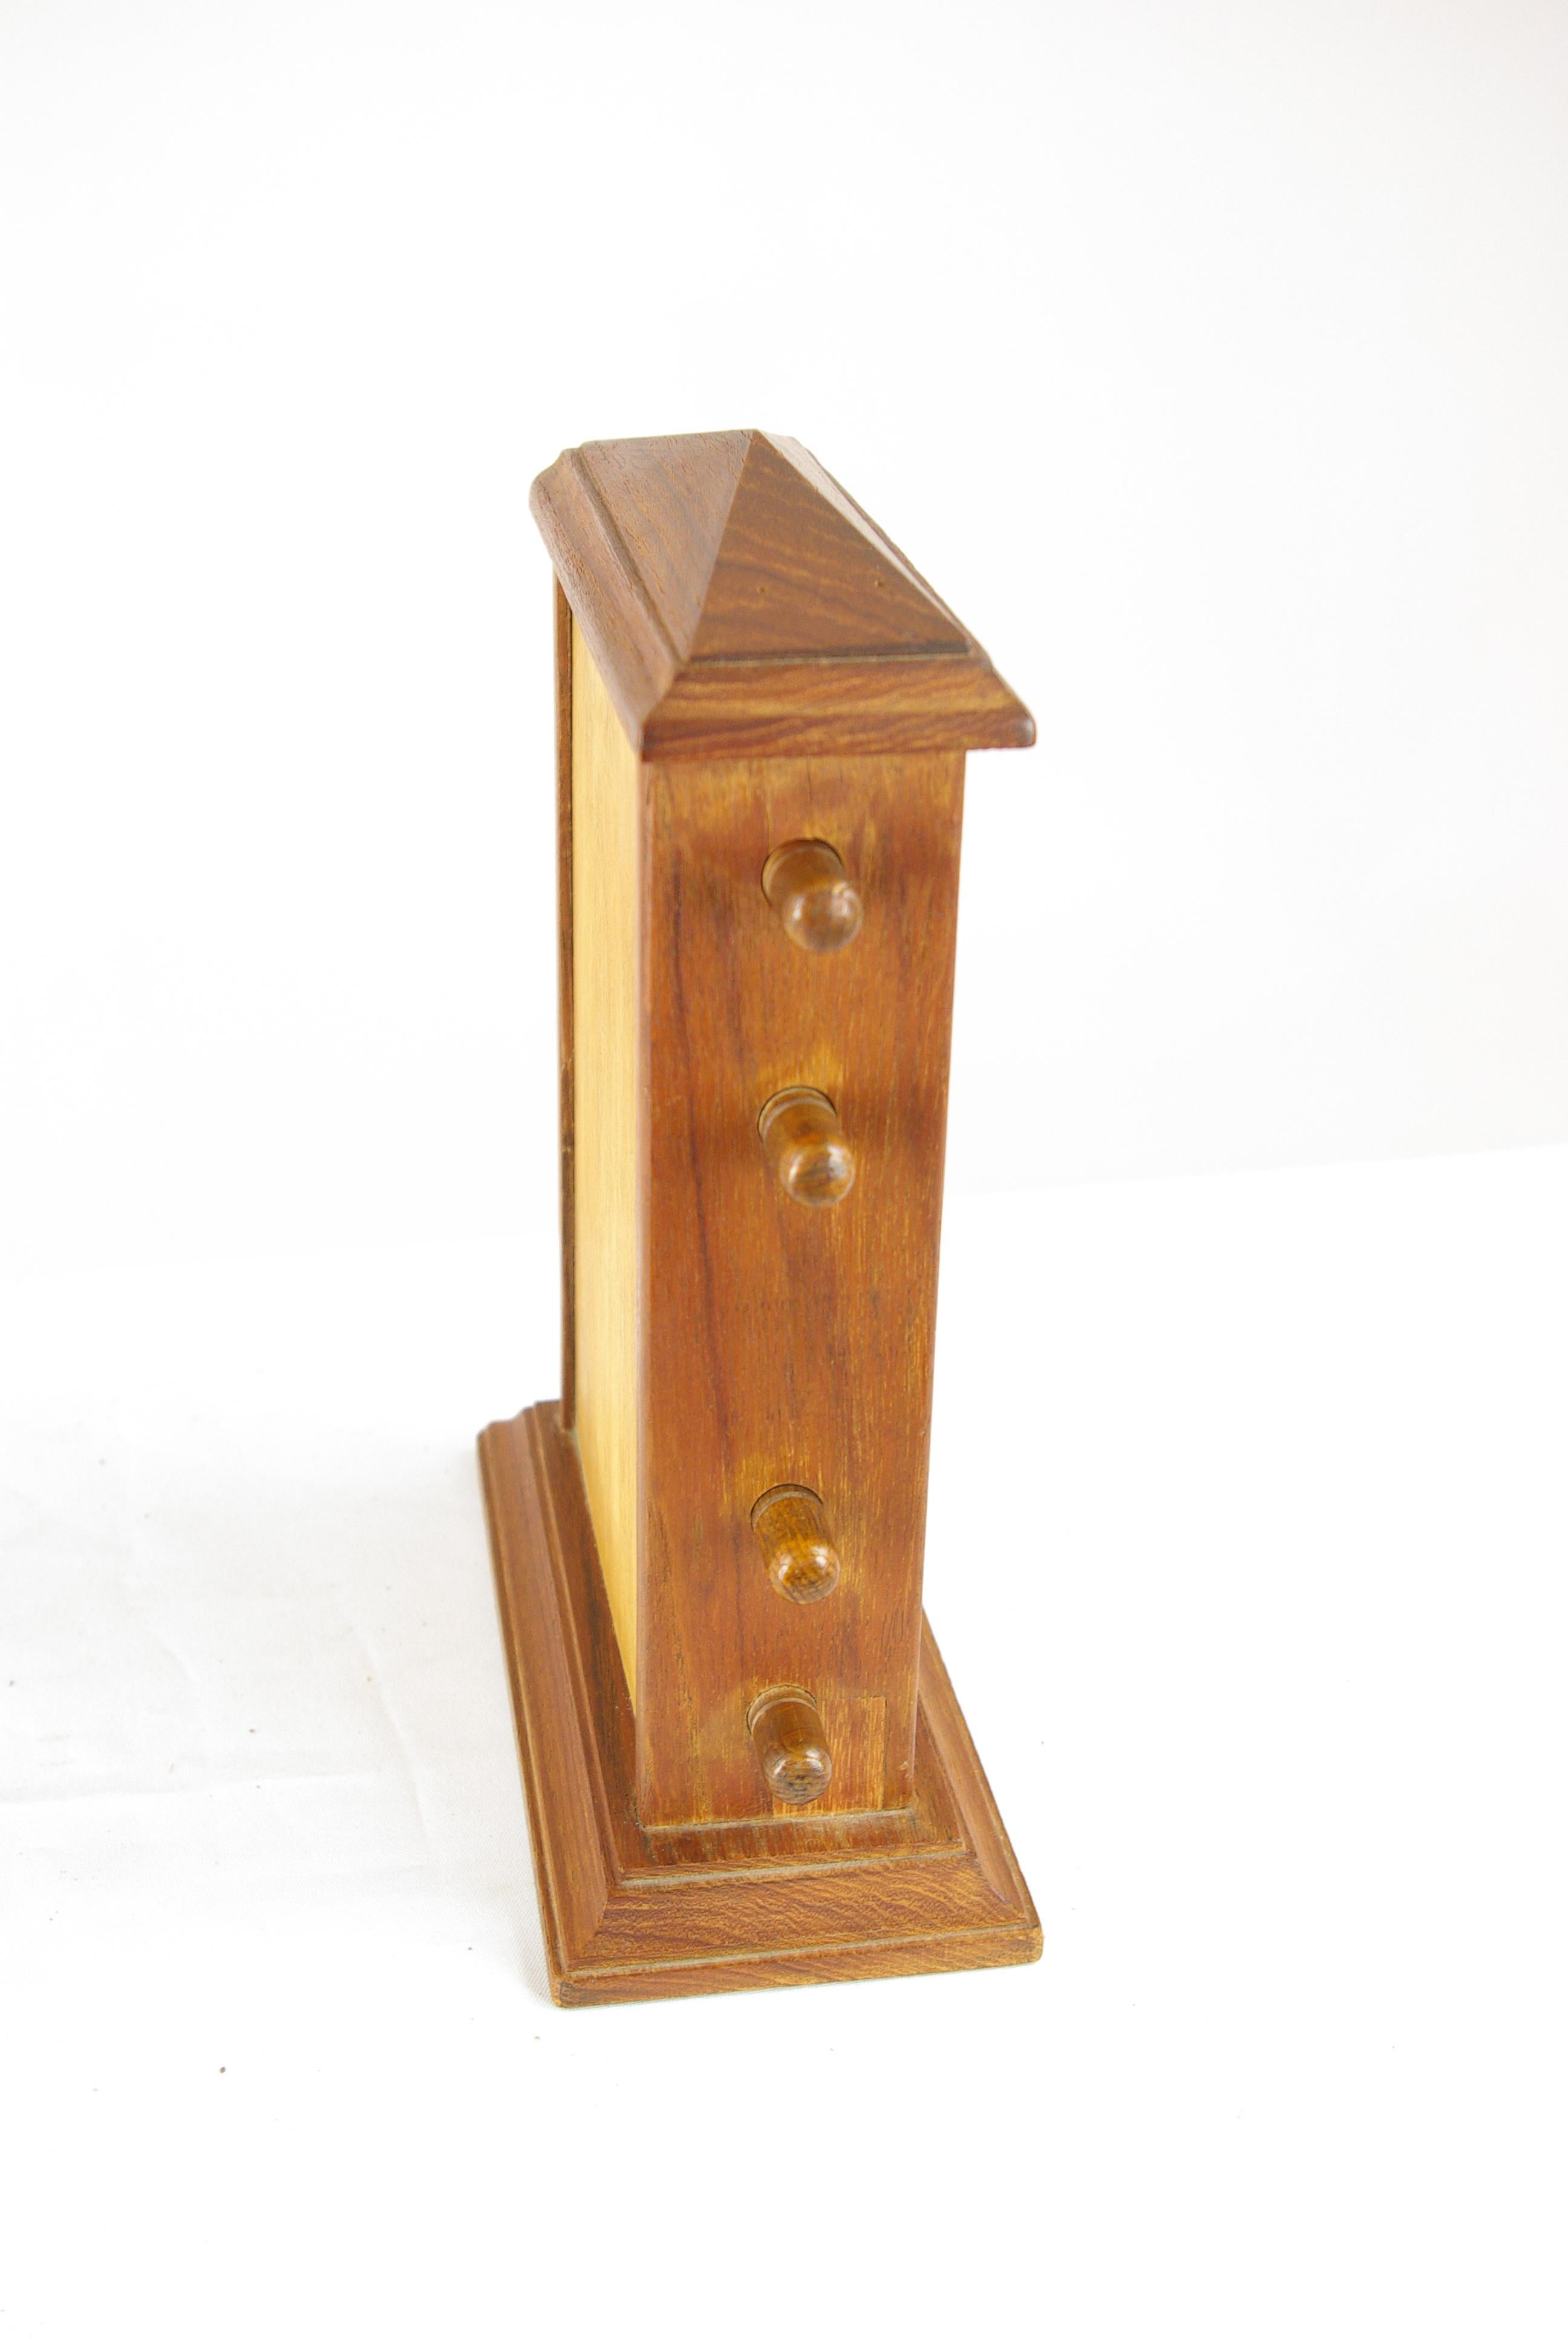 Antique desktop calendar, antique tiger oak perpetual calendar, Scotland, 1900, B1444

Scotland, 1900
Pyramid top
Day, date, and month on Linder spools behind glass
Adjustable side knobs
All original liner spools
Super quality and in excellent